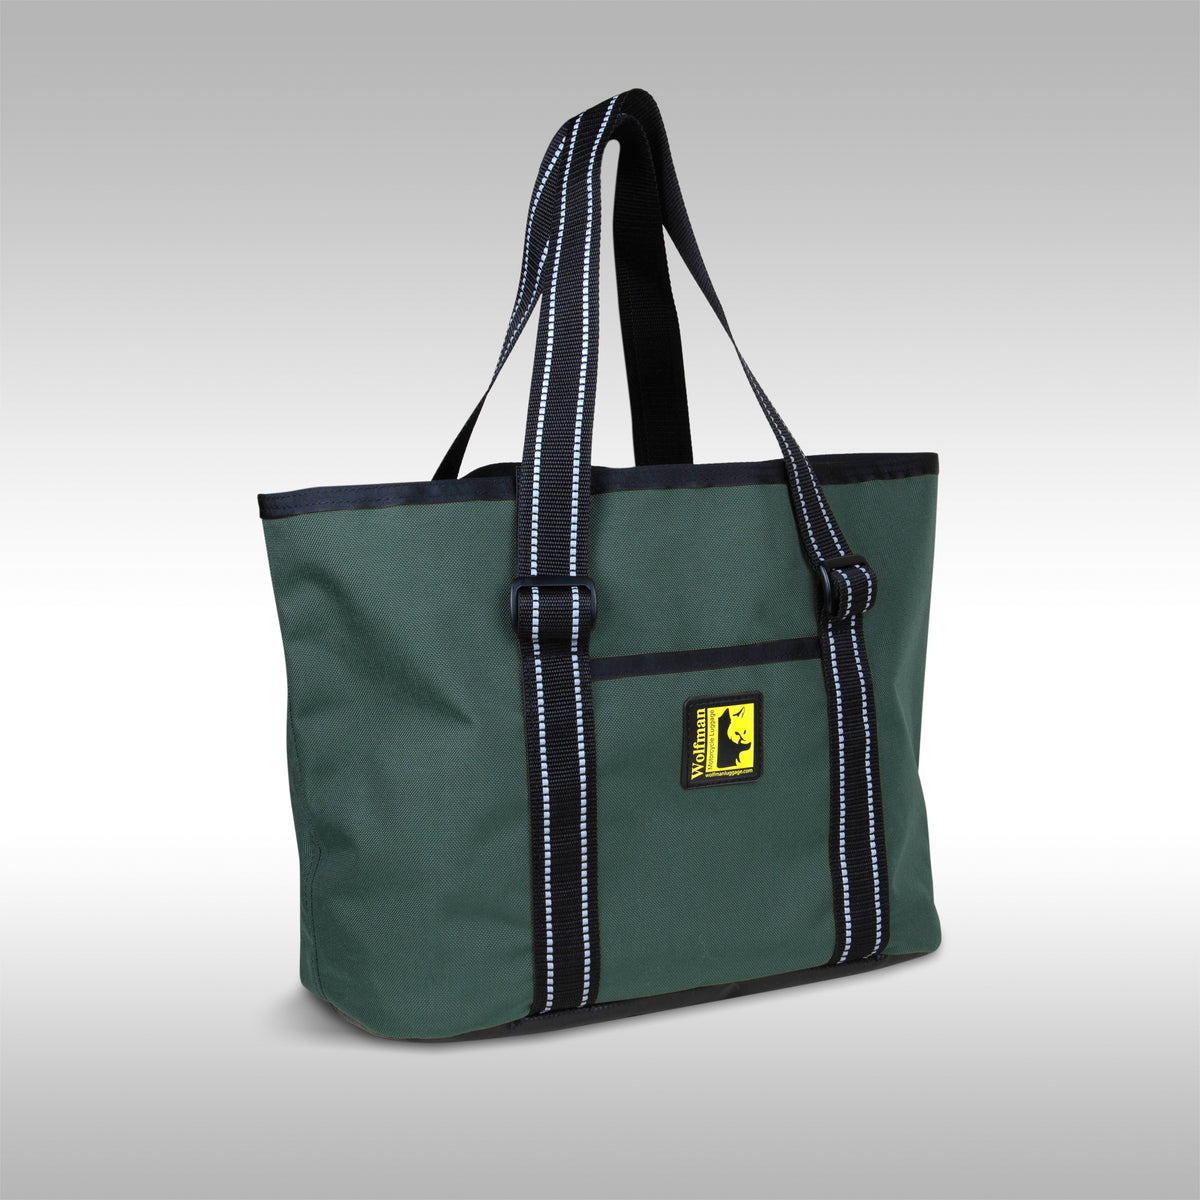 Wolfman Luggage, best known for motorcycle luggage makes a special heavy duty tote bag for us. From groceries to the beach or packed into motorcycle hard boxes.. 